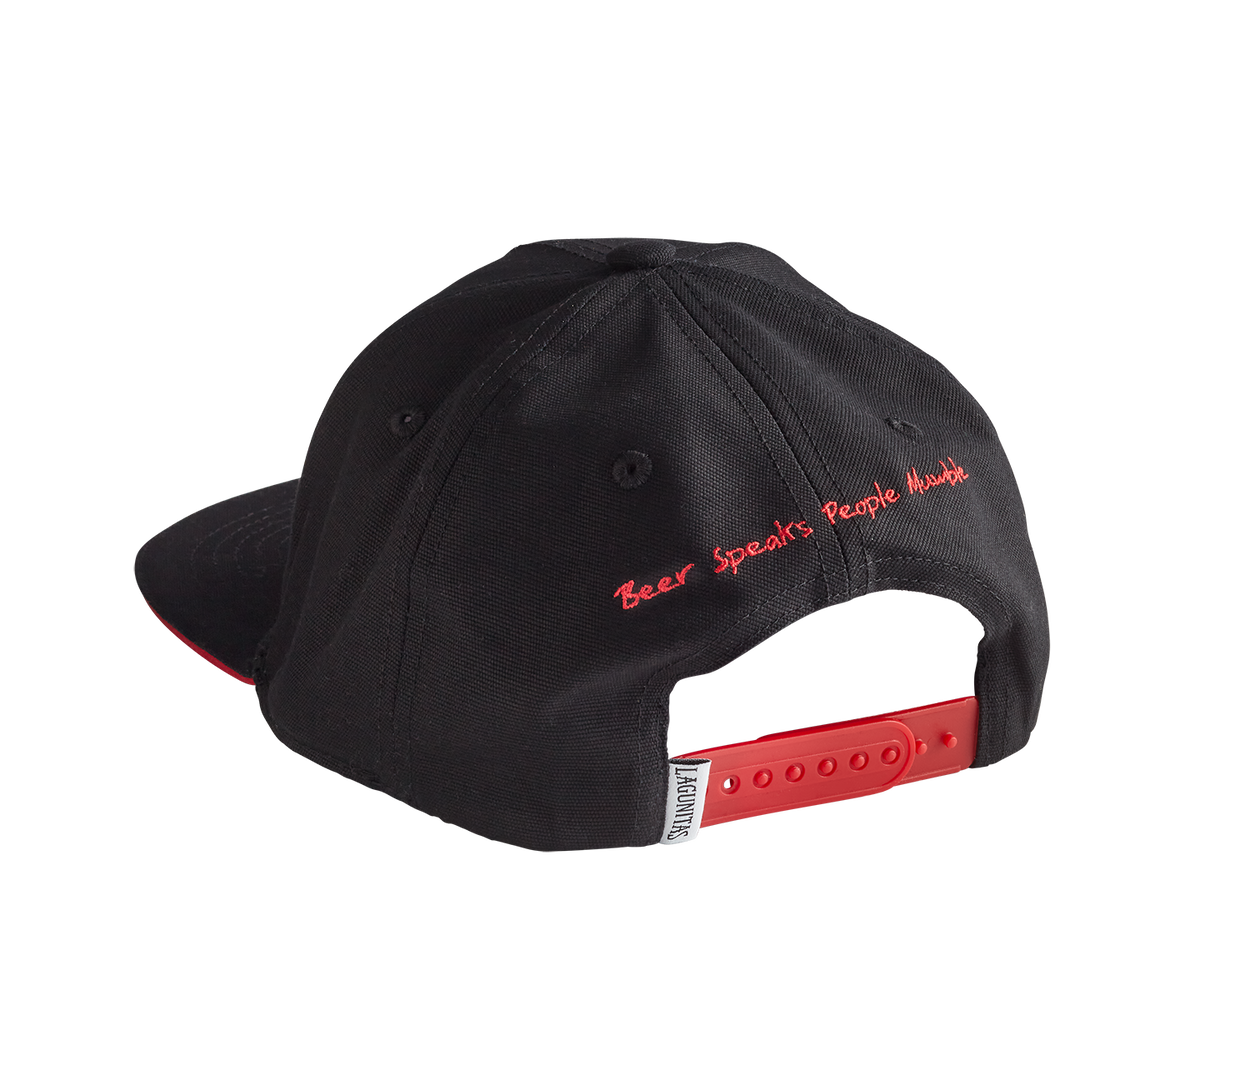 “A trendy and stylish cap featuring the iconic Lagunitas branding. Crafted with high-quality materials, adjustable snapback closure, and a bold design. Perfect for craft beer enthusiasts and fans of Lagunitas Brewery”